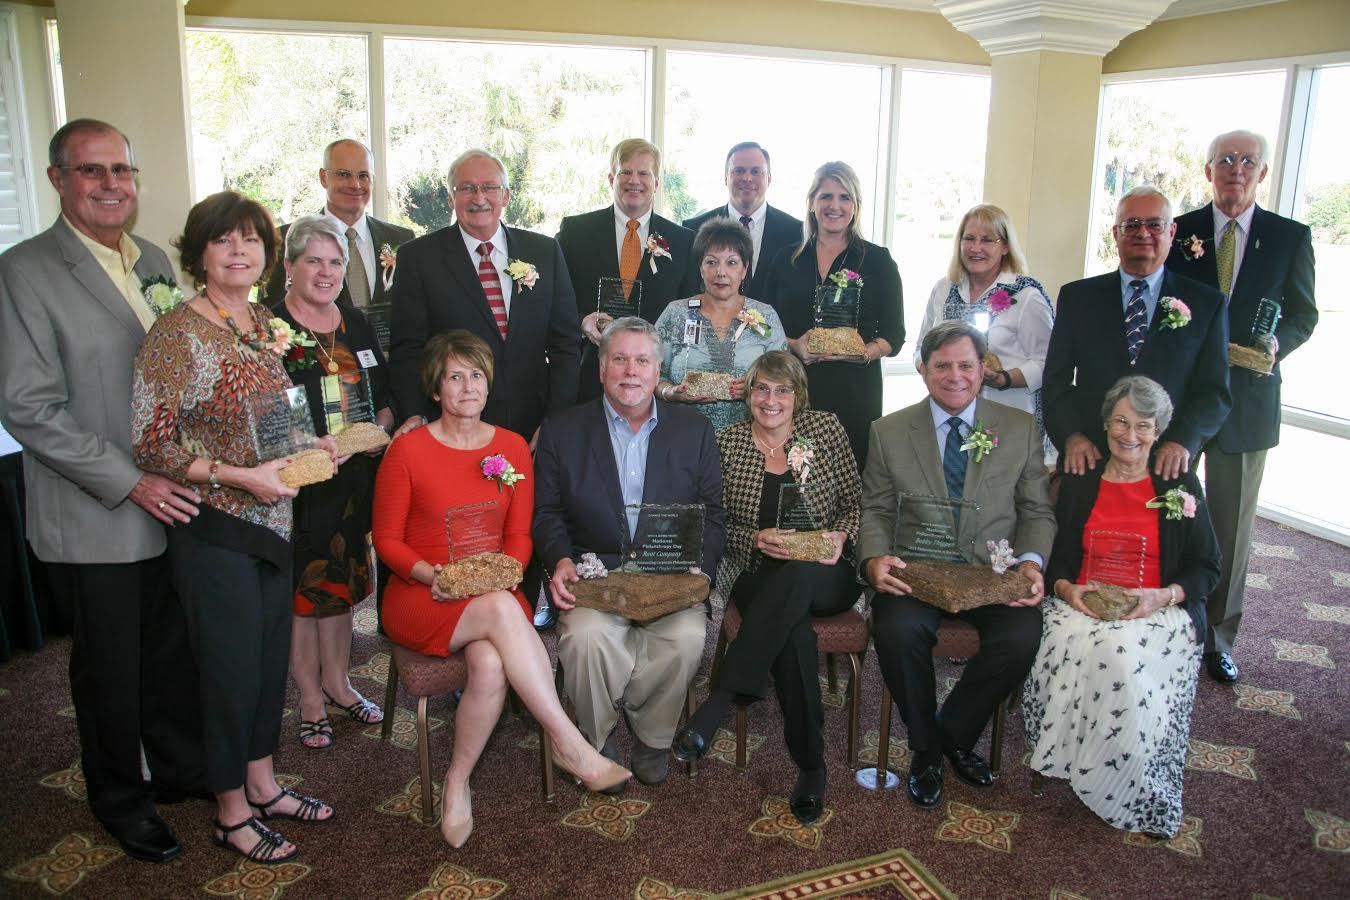 All the honorees from the recent event (Courtesy photo)